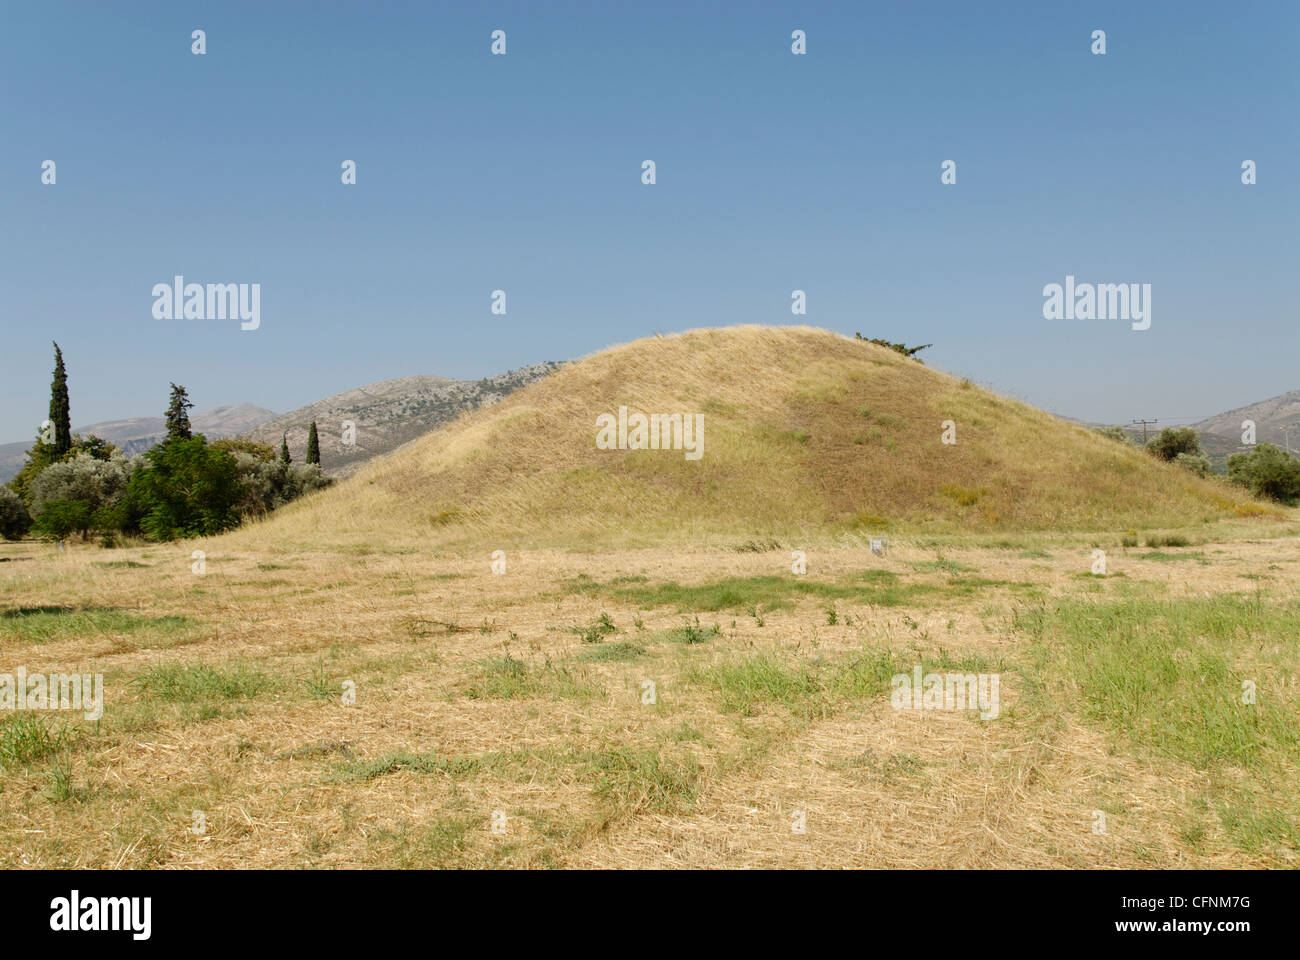 Marathon. Greece. View of the burial mound or tumulus of the 192 Athenian hoplites that died in battle here against the Stock Photo